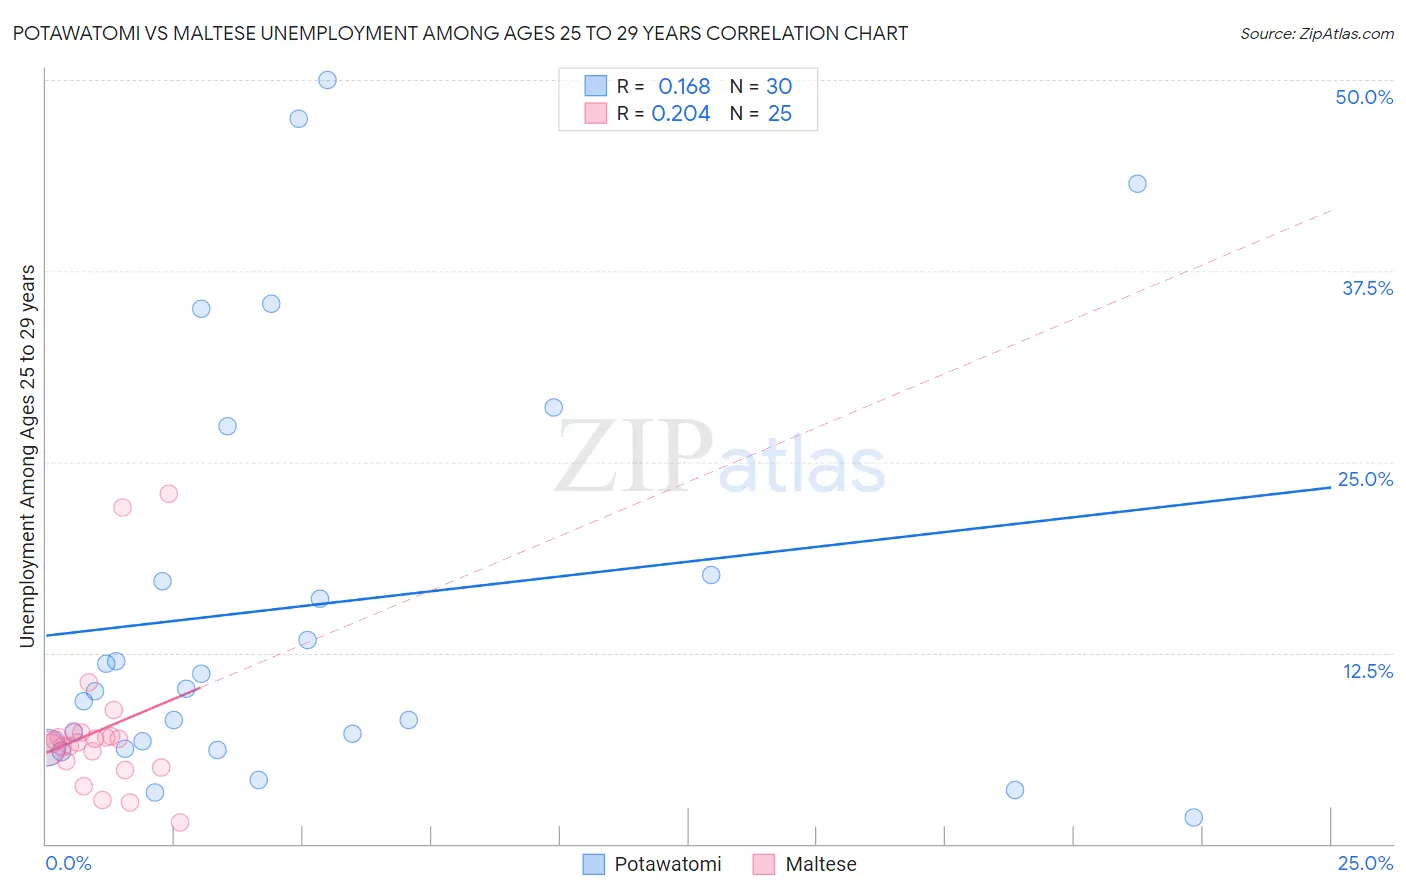 Potawatomi vs Maltese Unemployment Among Ages 25 to 29 years